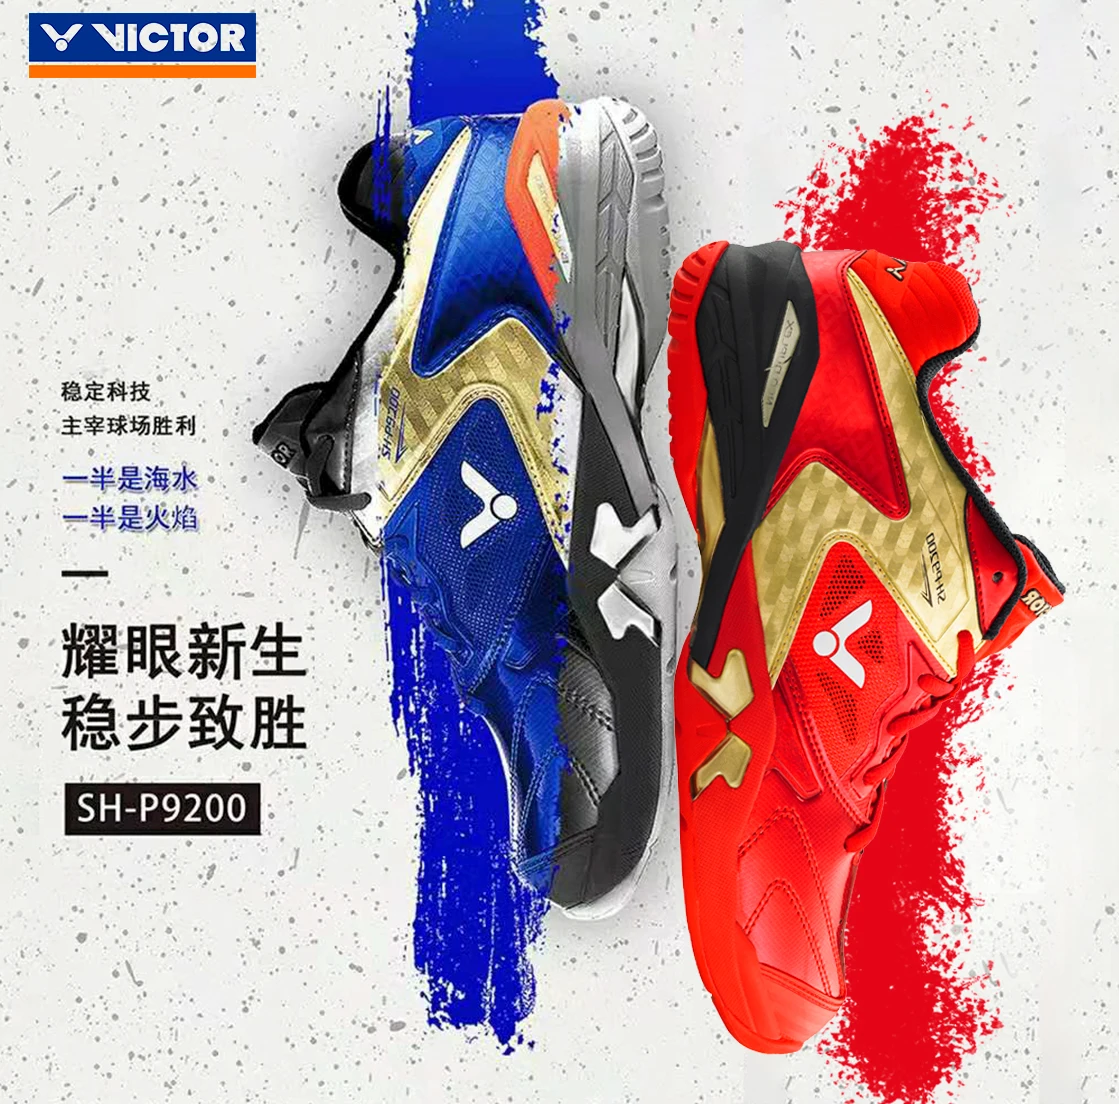 

Victor Badminton Shoes SH-P9200, Red,blue